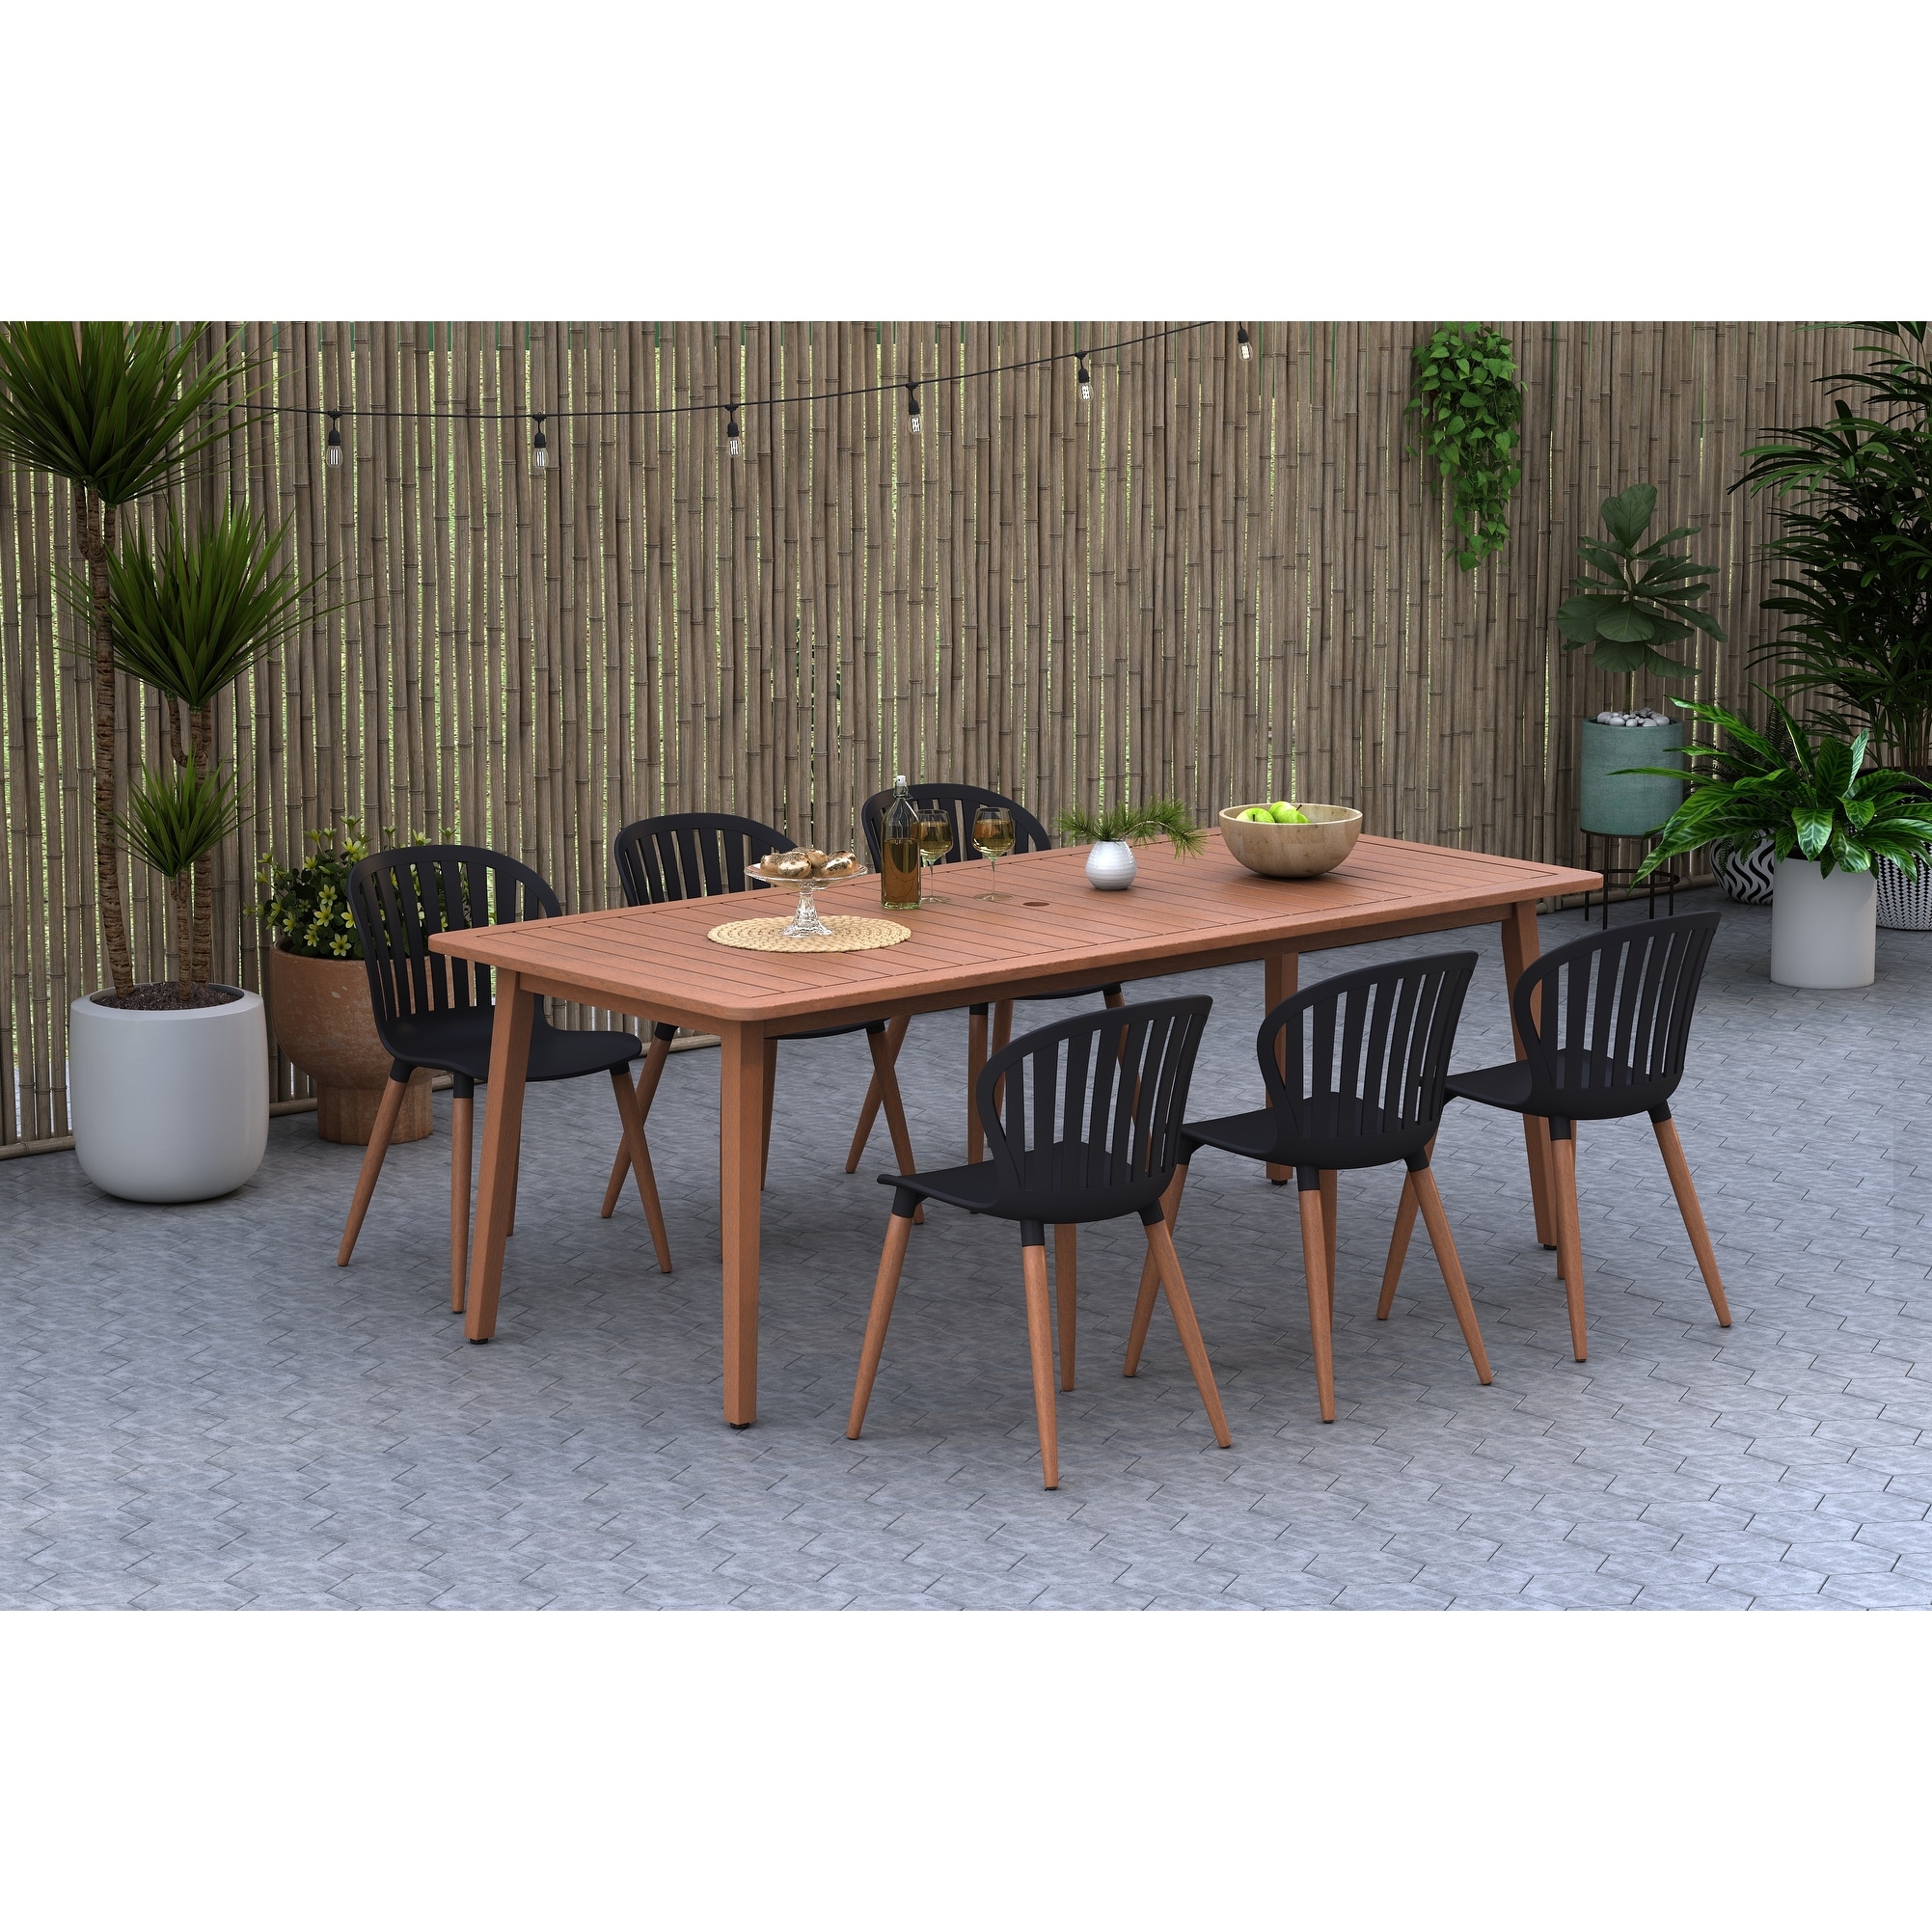 Amazonia Fsc Certified Wood Chalerston Oudoor Patio Dining Set